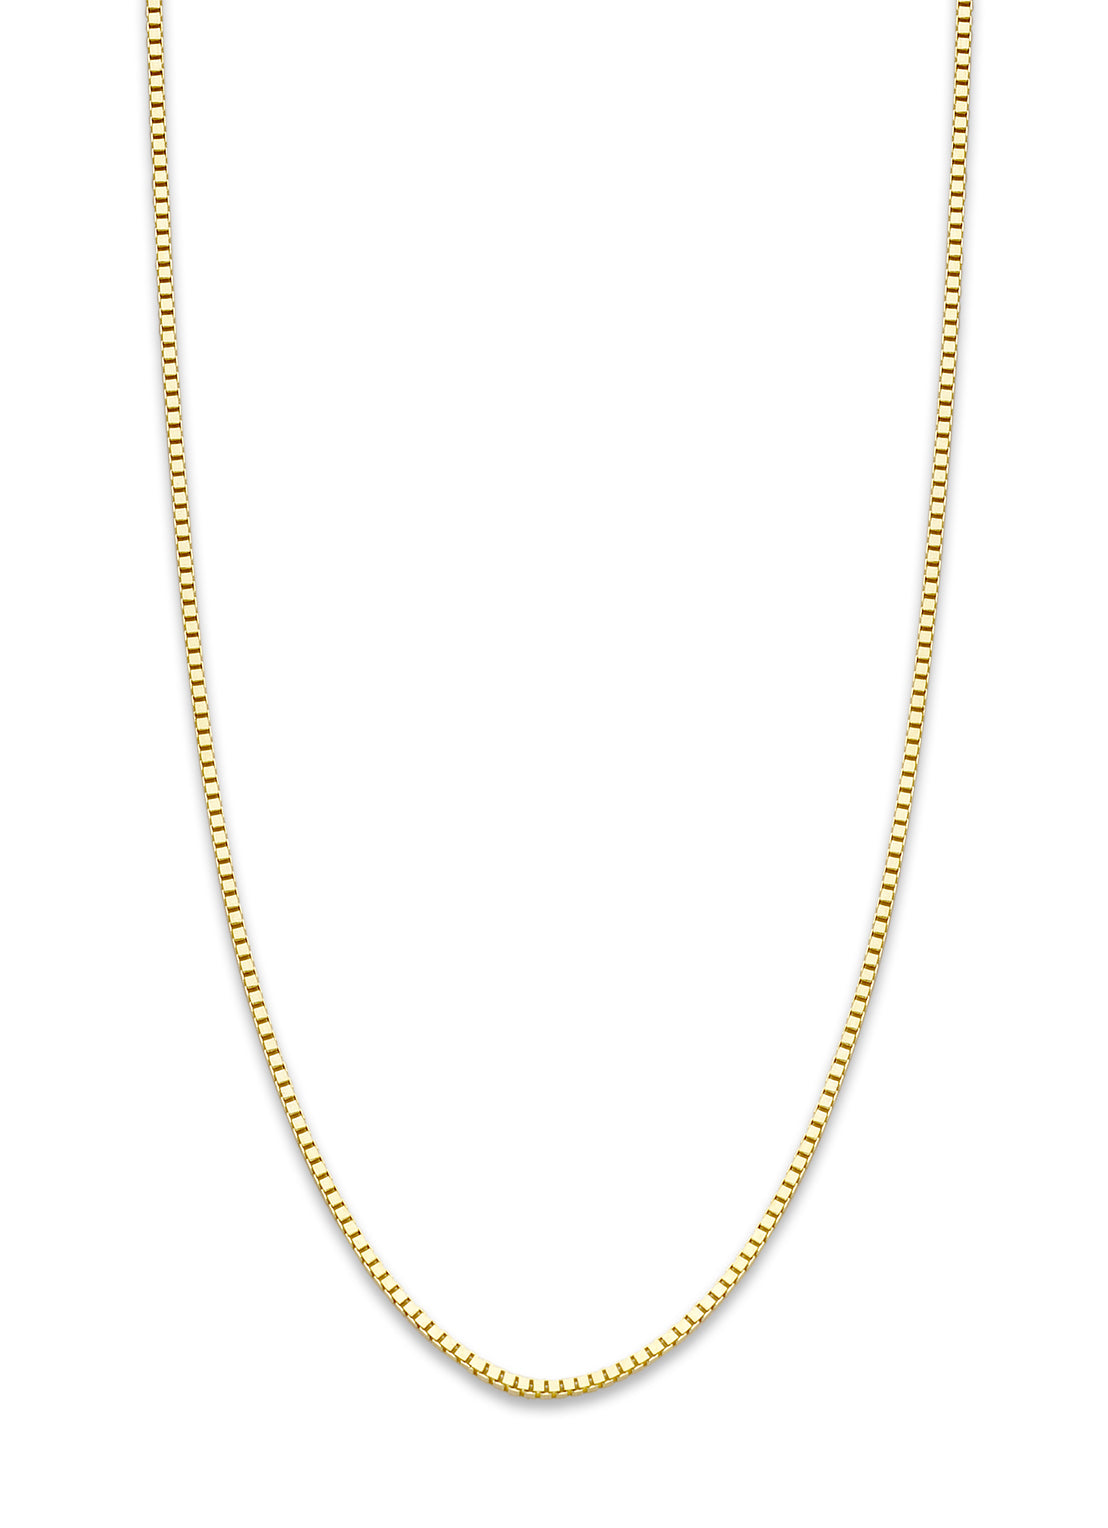 Yellow gold Collier Timeless Treasures (60cm)